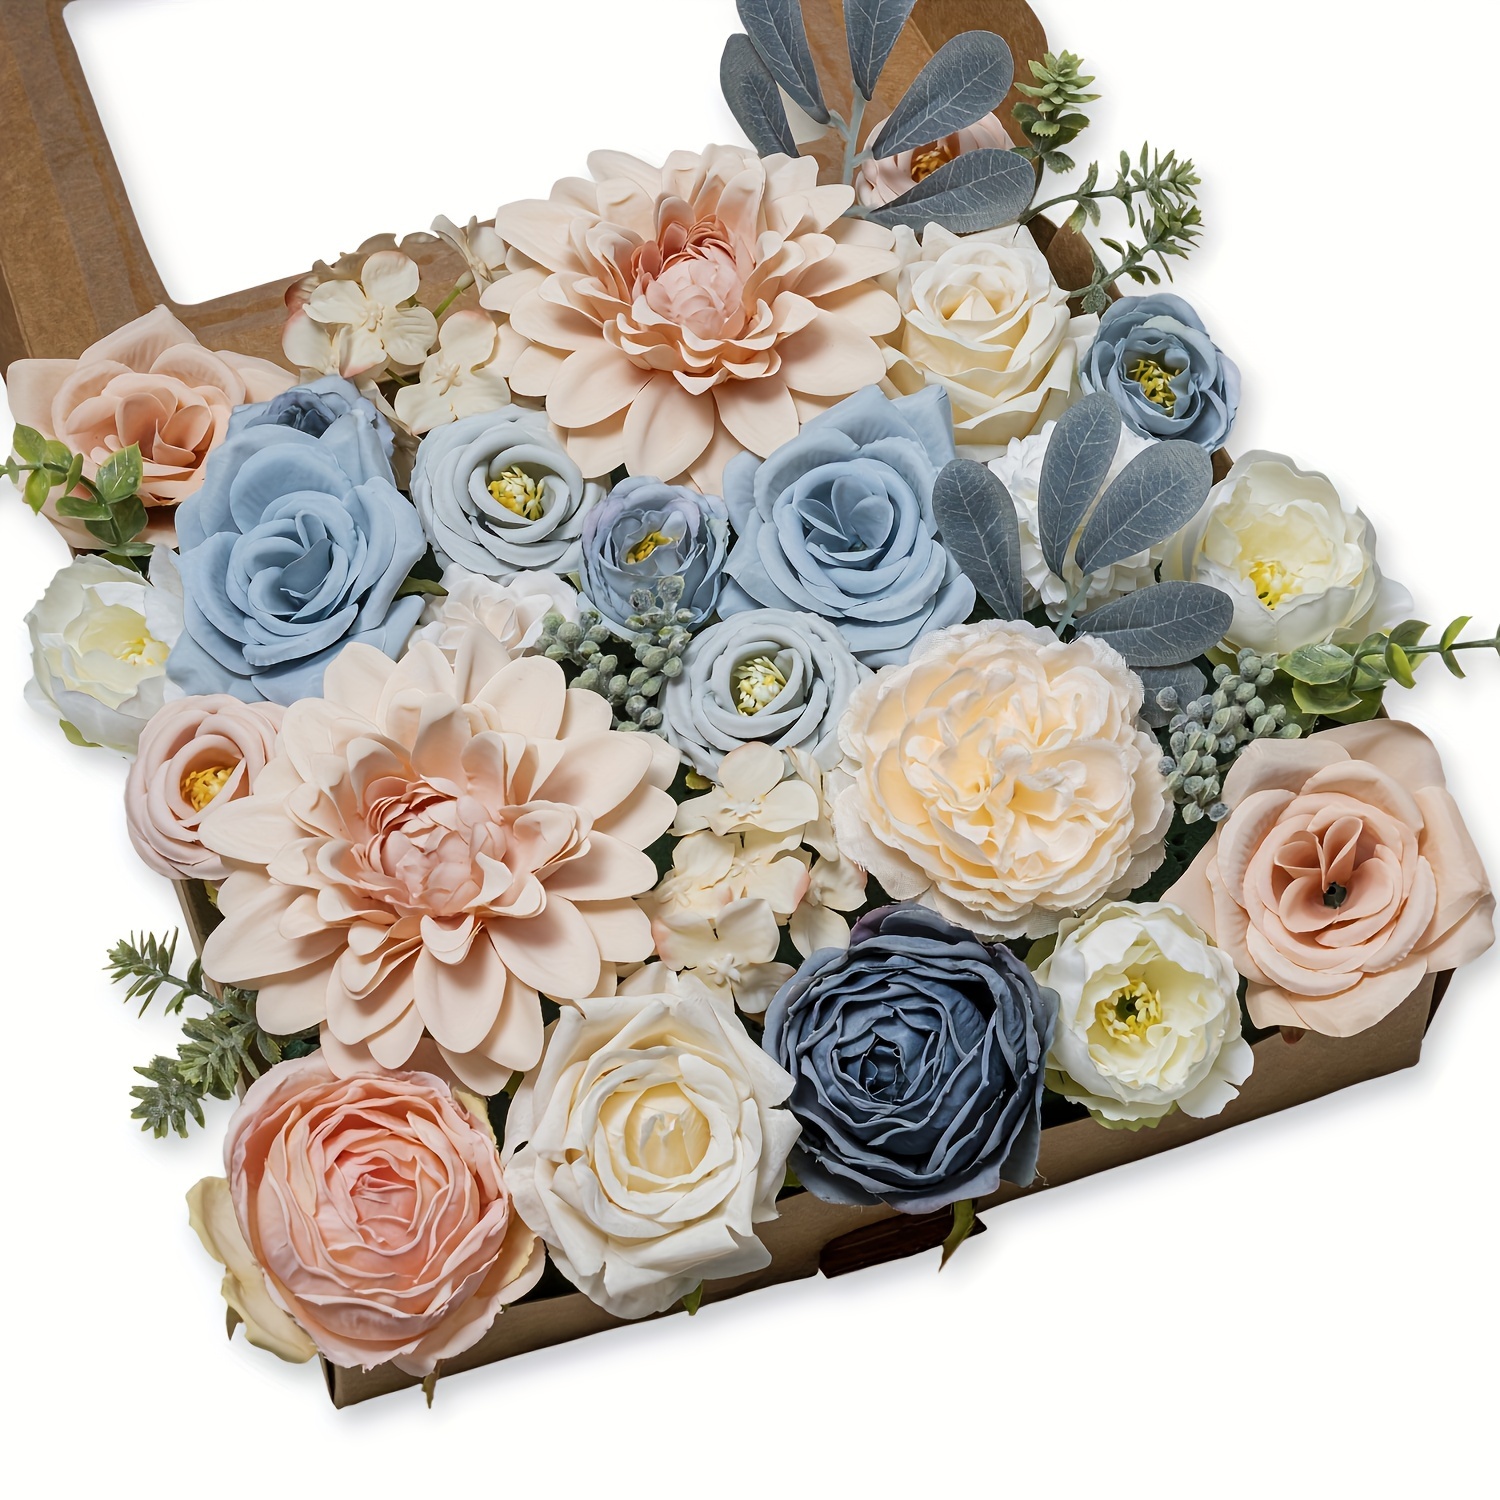 Ling's Moment Dusty Rose Artificial Flowers and Greenery Combo Box Set,Real  Touch Rose and Lifelike Greenery Leaves for DIY Wedding Bouquets and